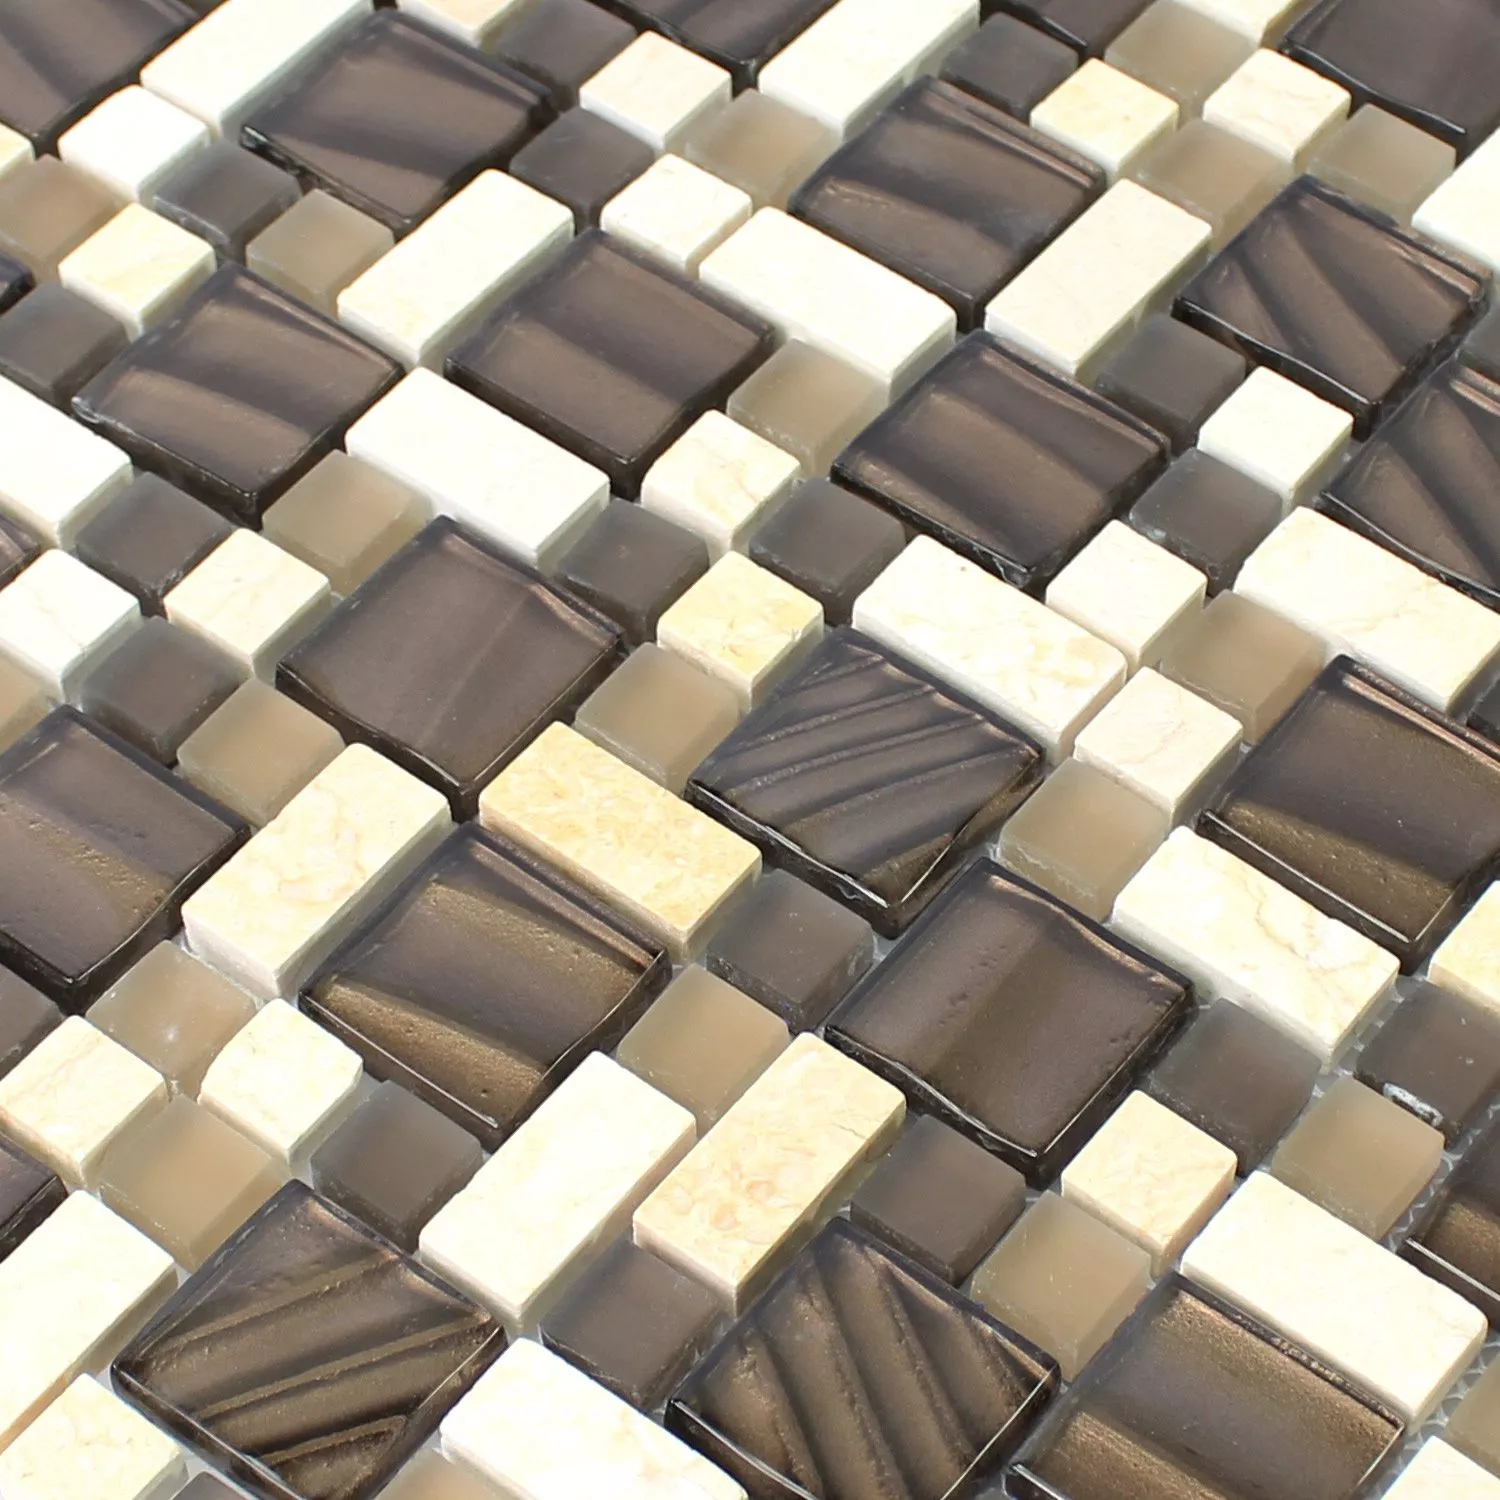 Mosaic Tiles Glass Natural Stone Brown Beige